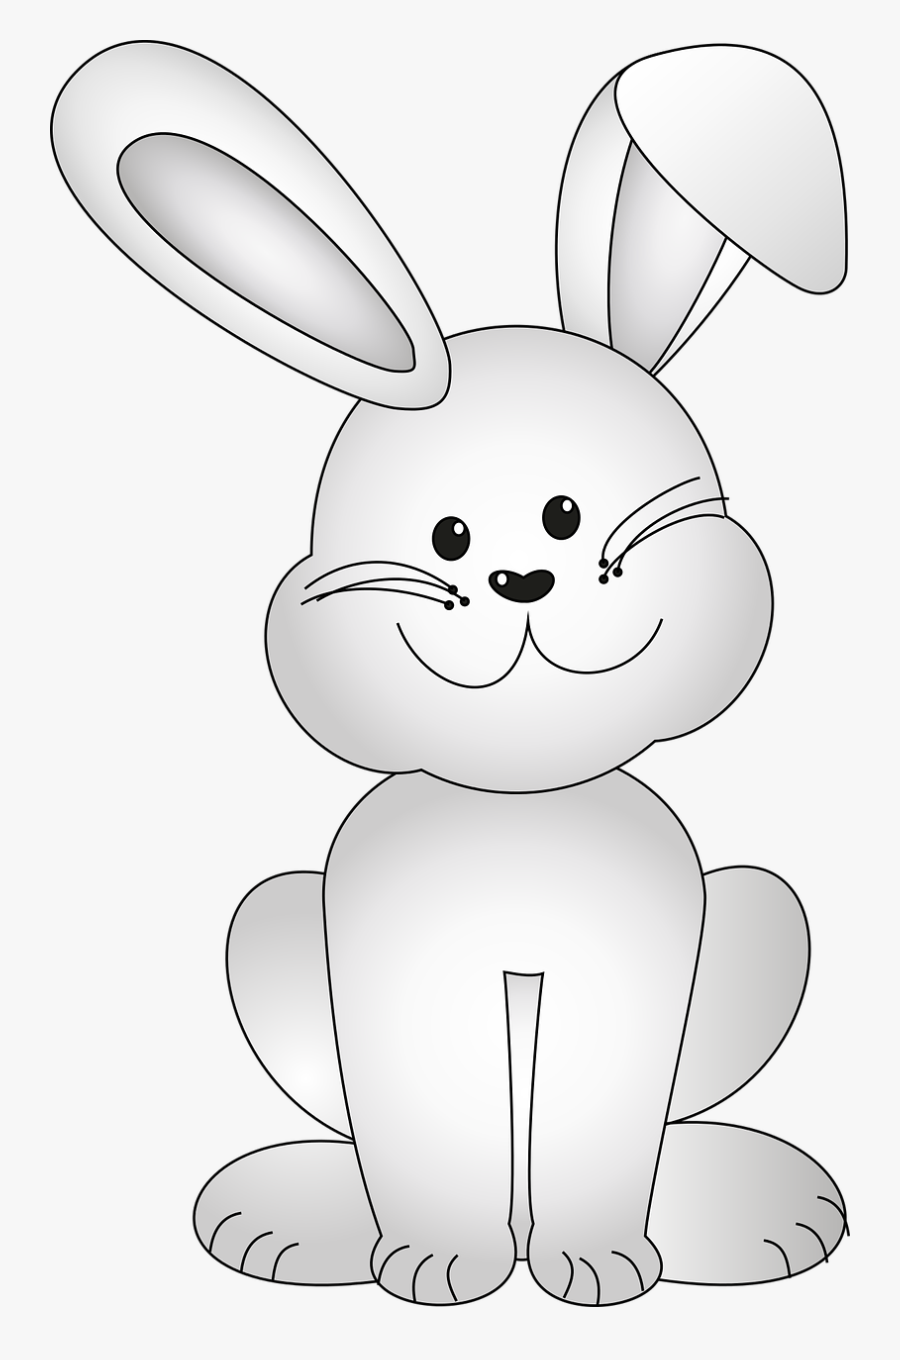 Transparent Easter Bunny Ears Clipart Black And White - White Rabbit Cut Out, Transparent Clipart